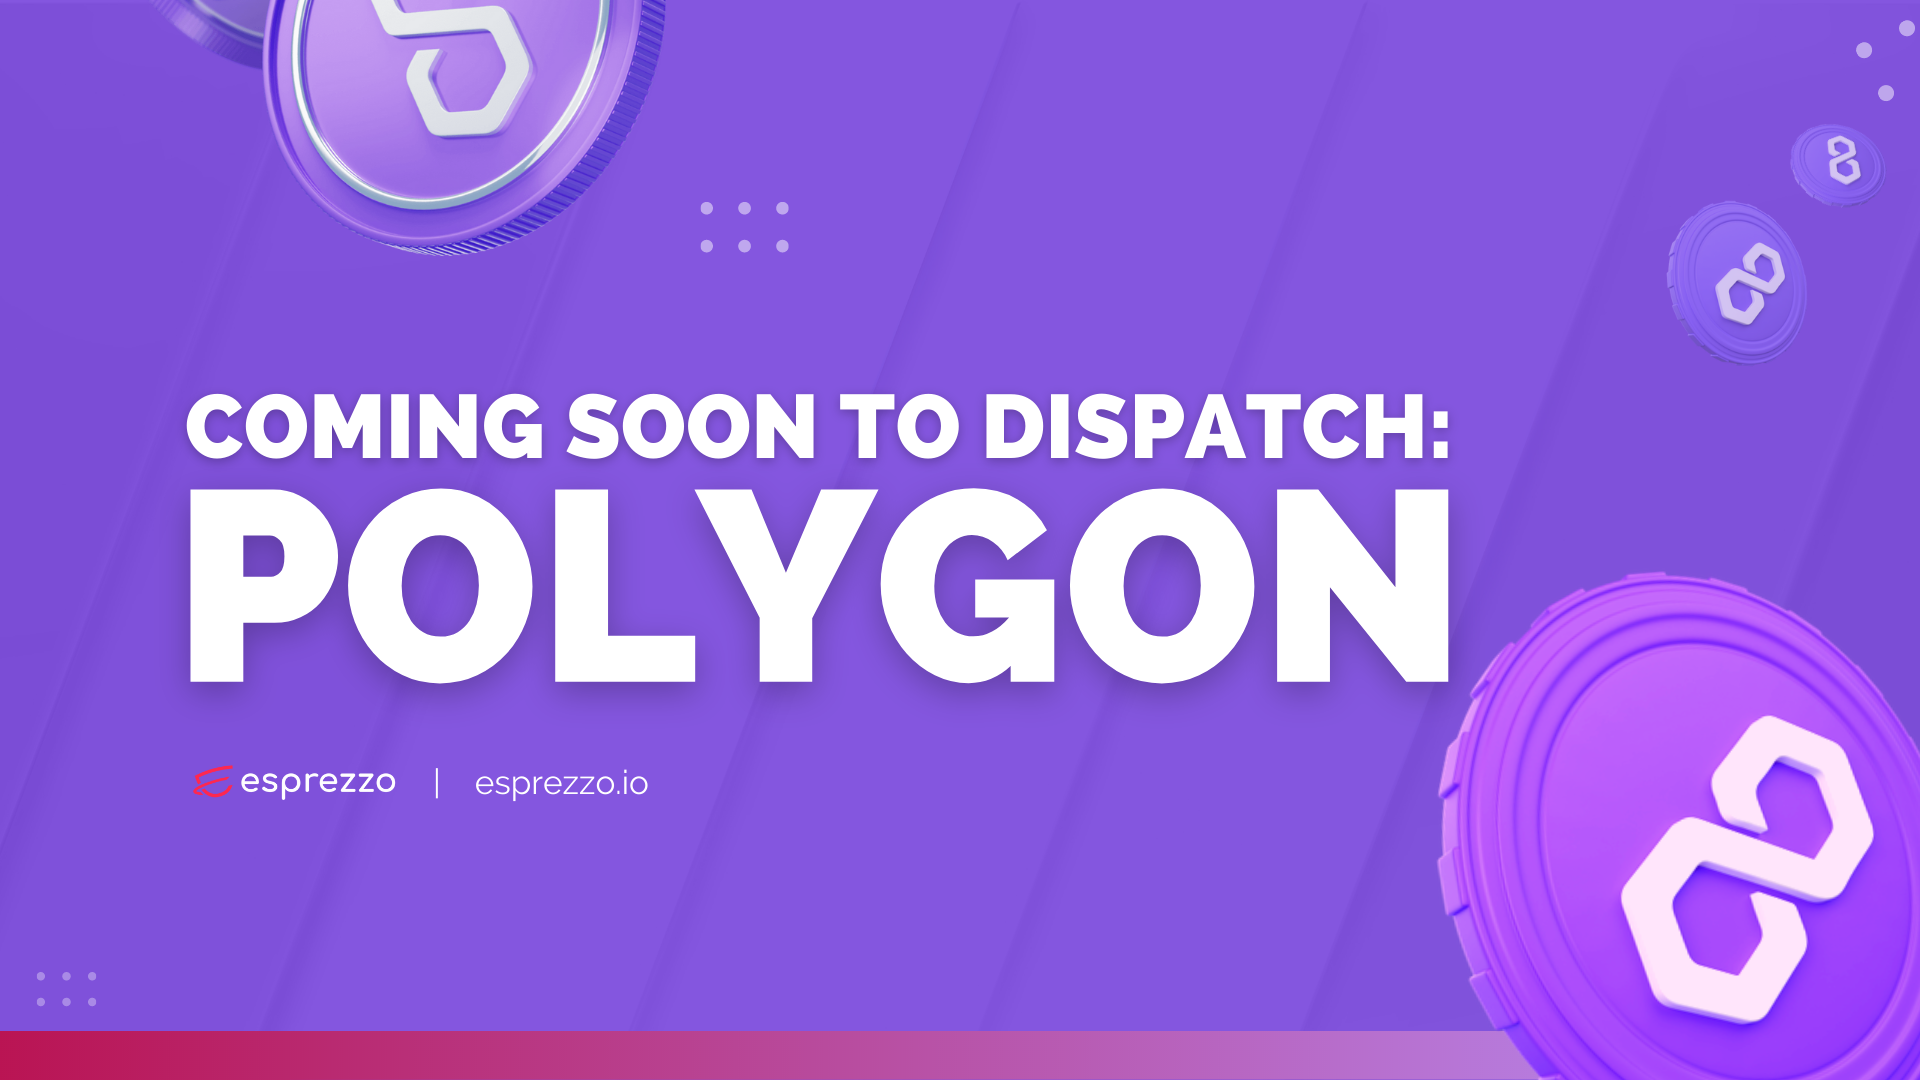 Polygon coming to Dispatch announcement graphic